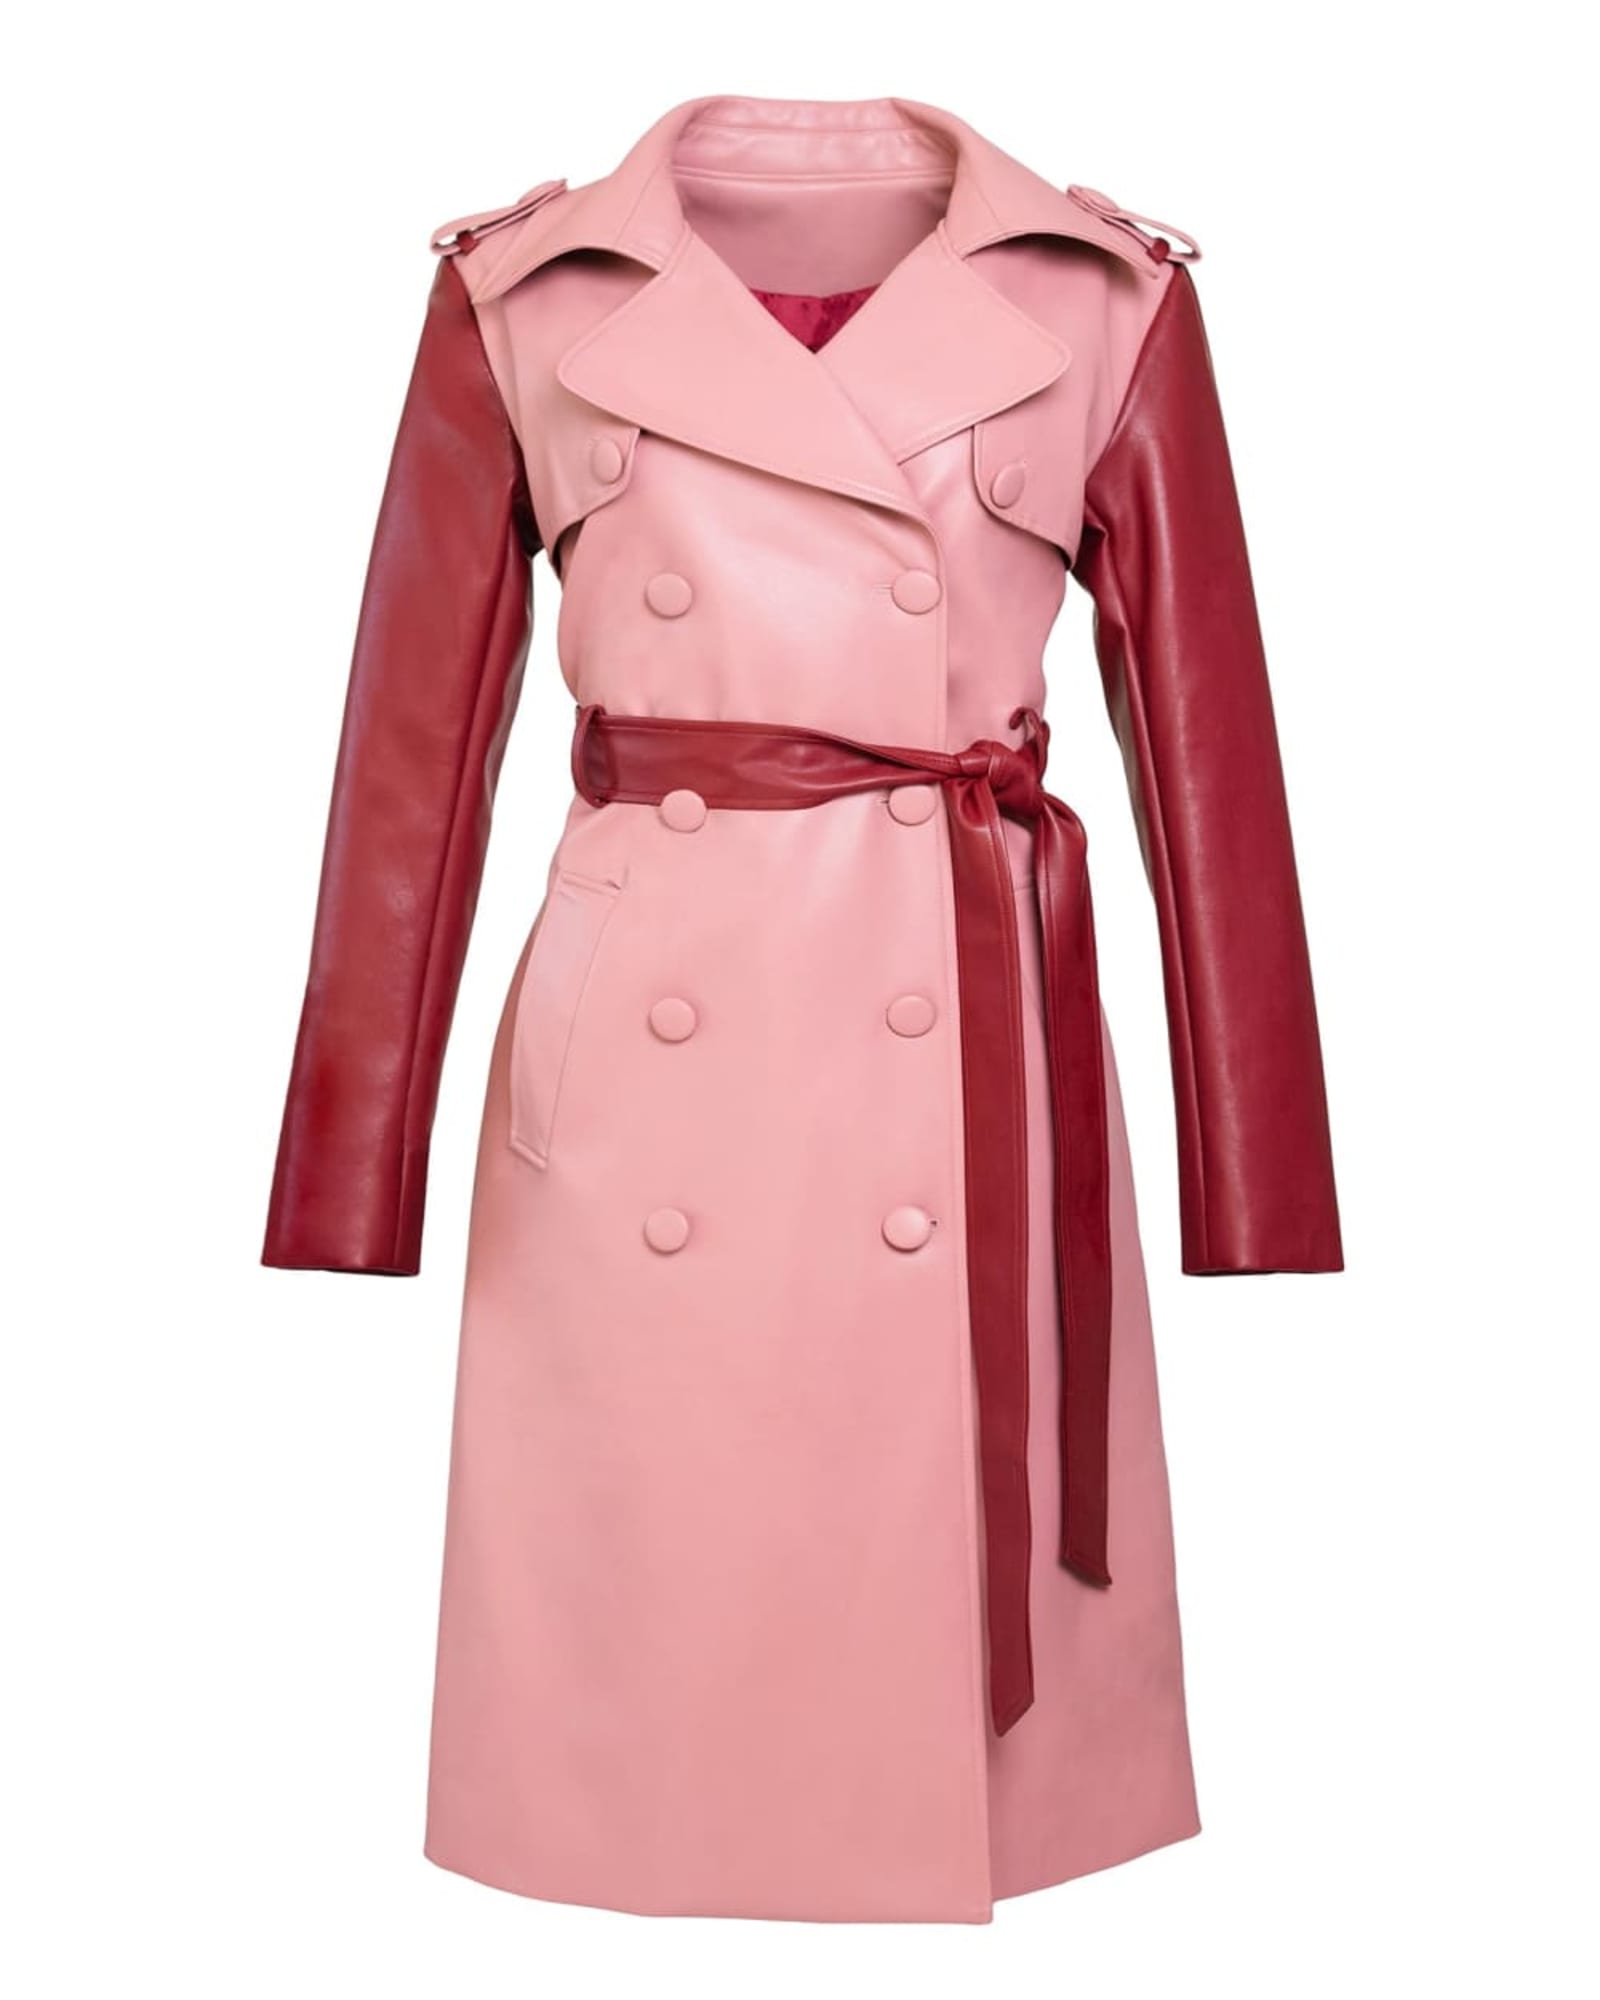 Two Tone Pink Trench Coat | Burgundy